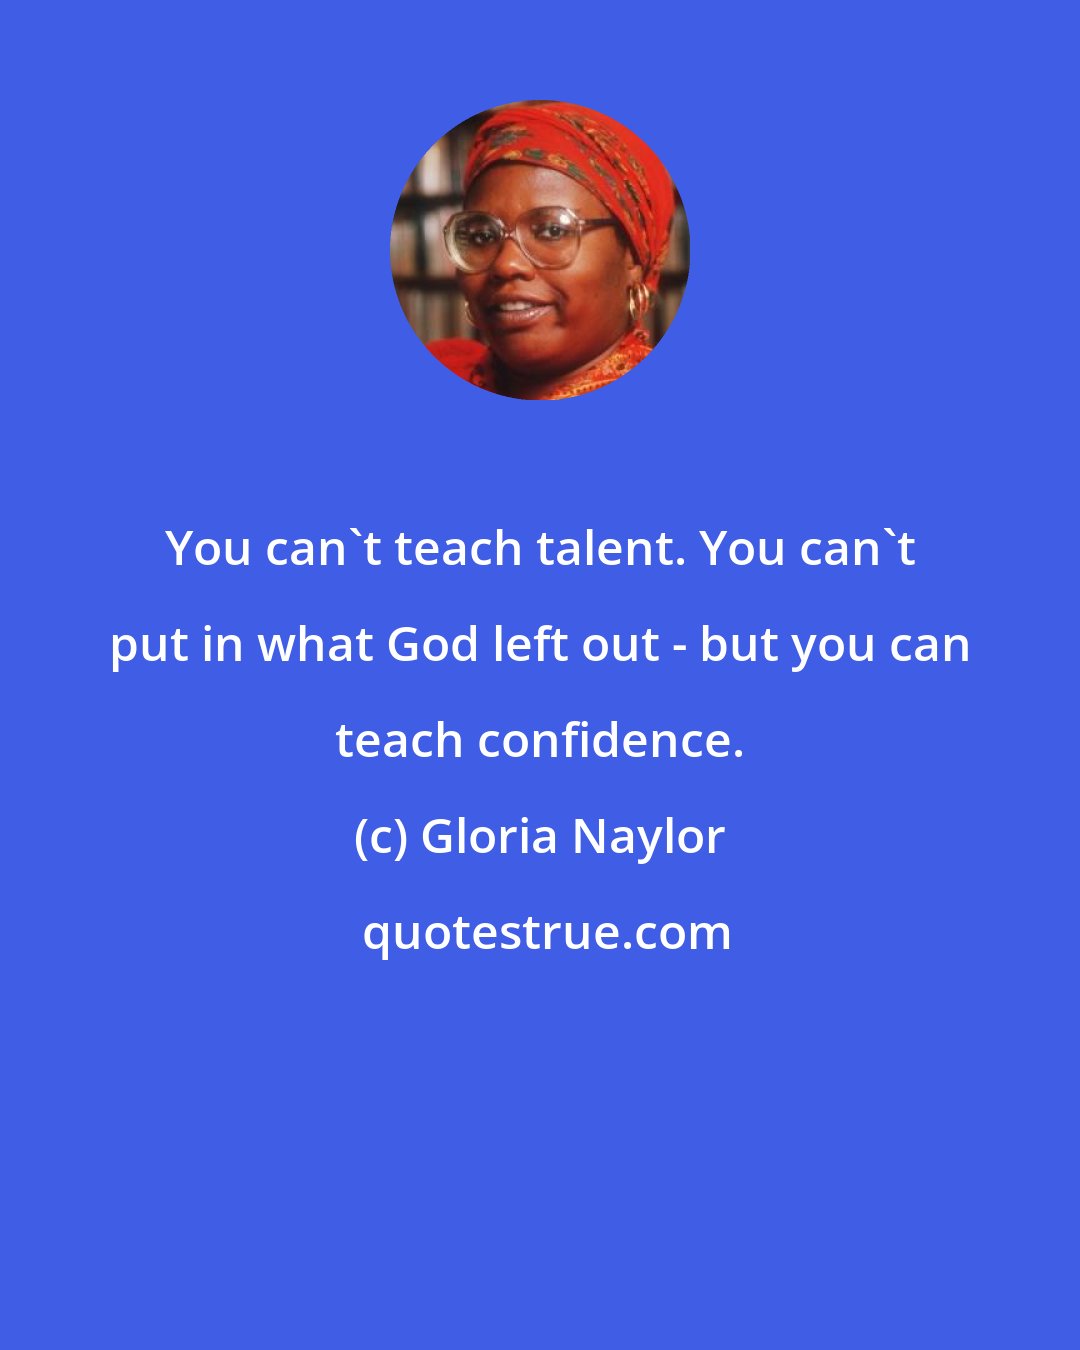 Gloria Naylor: You can't teach talent. You can't put in what God left out - but you can teach confidence.